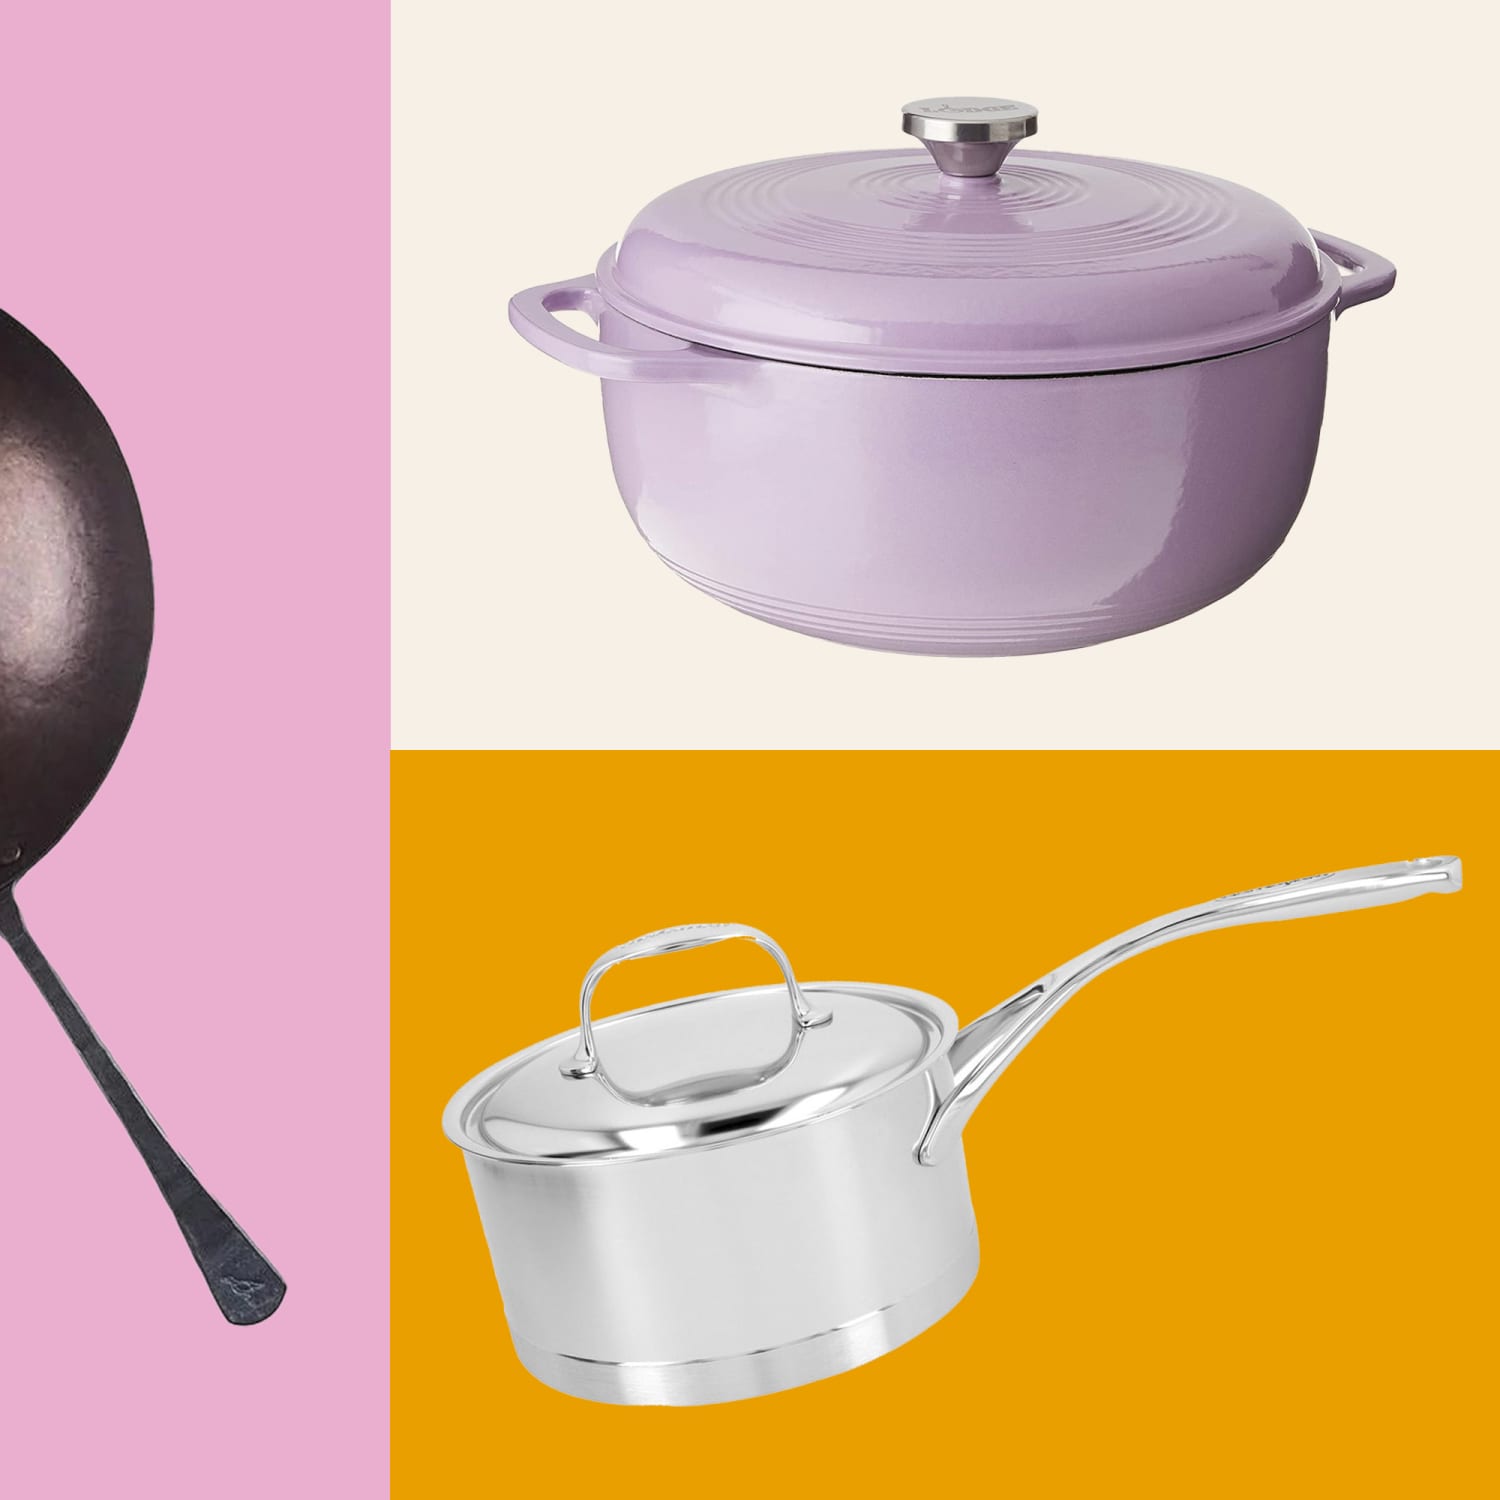 Essential Kitchen Cookware for Every Home Chef